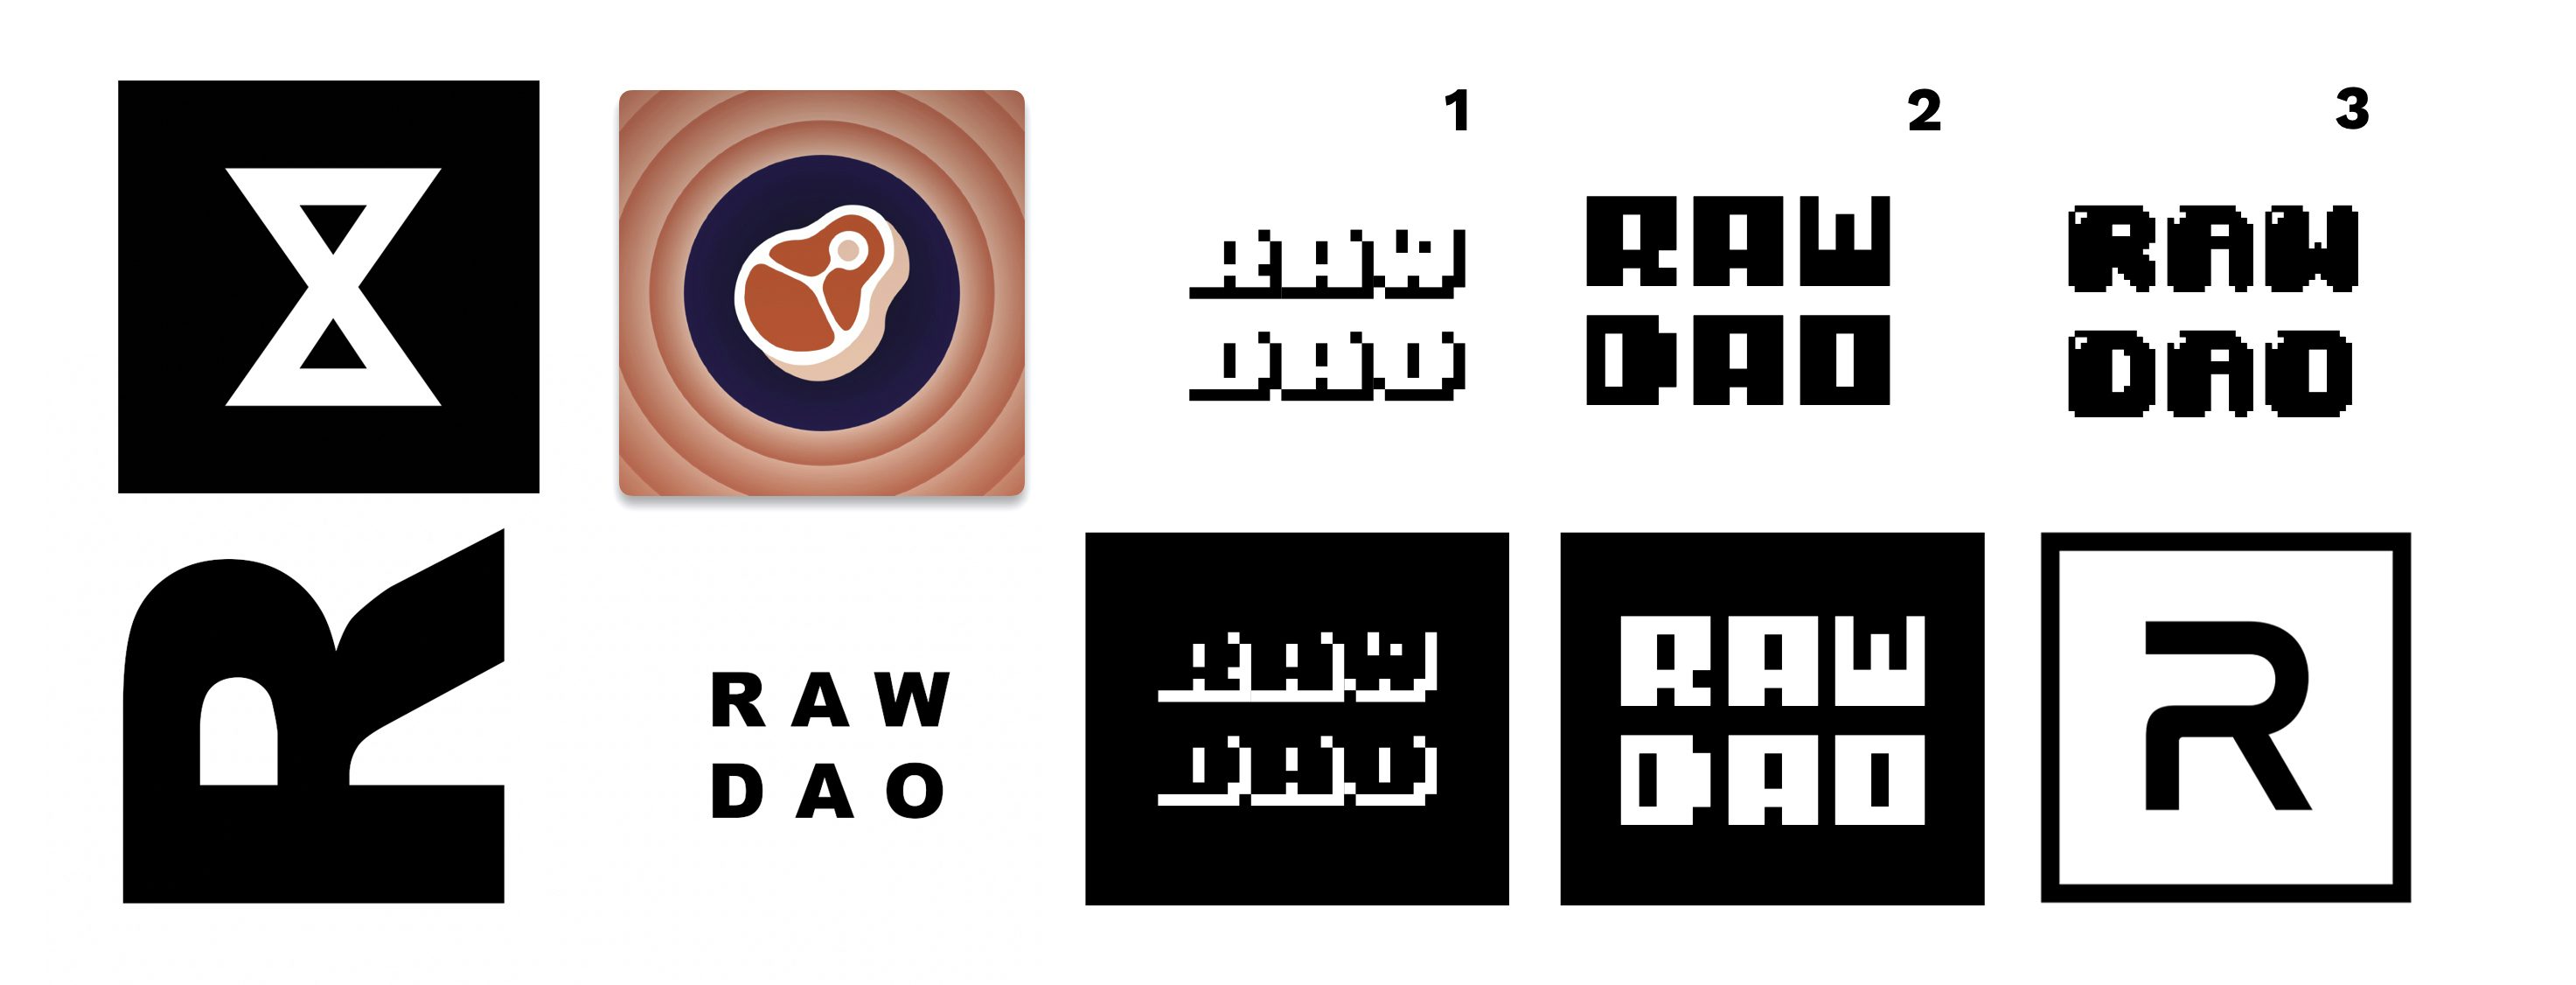 Selection of some of the initial RAW logo mocks from members Shane Lavalette, Claudia Pawlak, and Lucas Pontes